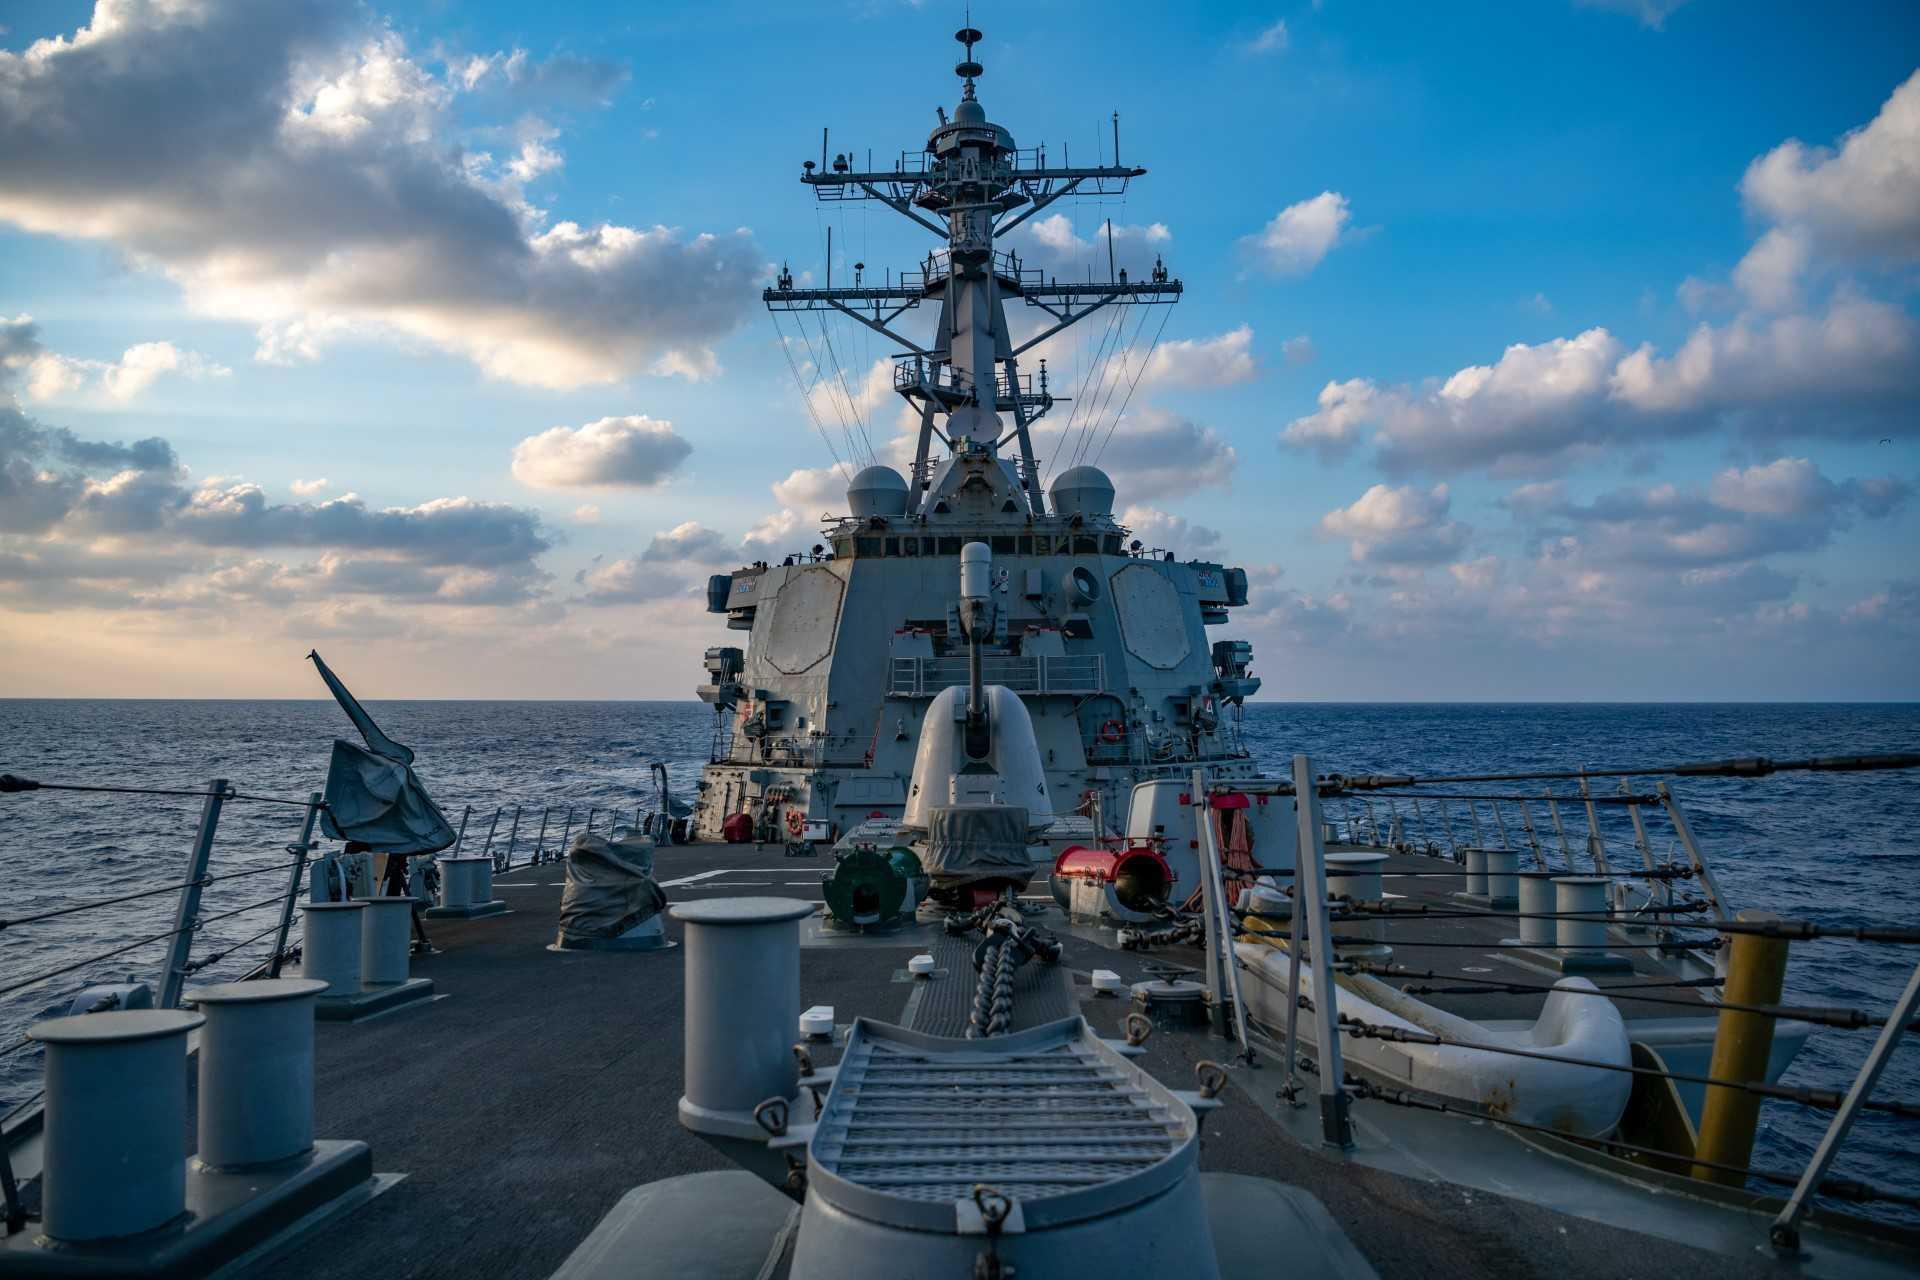 This US Navy photo released April 29, 2020 shows The Arleigh-Burke class guided-missile destroyer USS Barry (DDG 52) conducting underway operations on April 28, 2020 in the South China Sea. Photo: AFP 